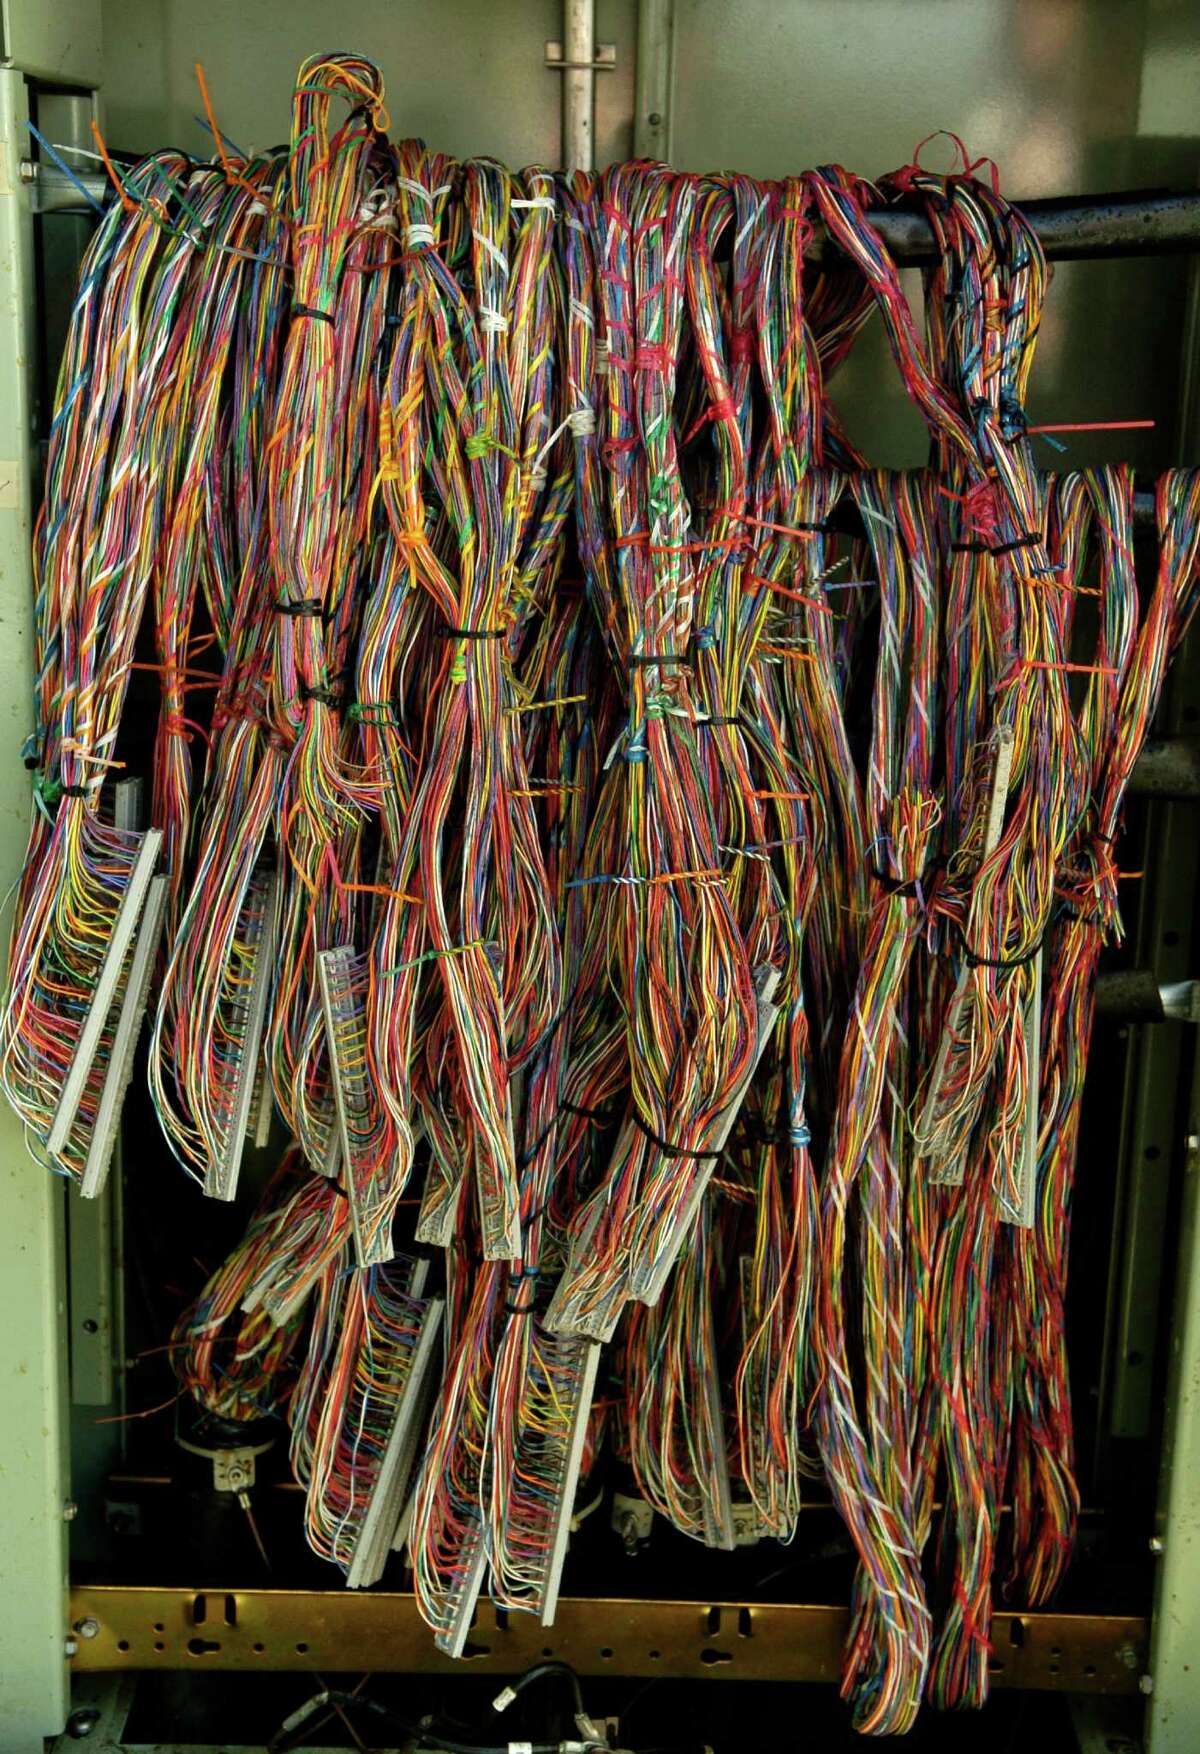 A residential neighborhood in northern Colorado Springs shows newly installed infrastructure that support fiber to the node investment. The box contains the fiber connections to the neighborhood, electronics that light the fiber, and the power source. Kathryn Scott Osler, The Denver Post (Photo By Kathryn Scott Osler/The Denver Post via Getty Images)